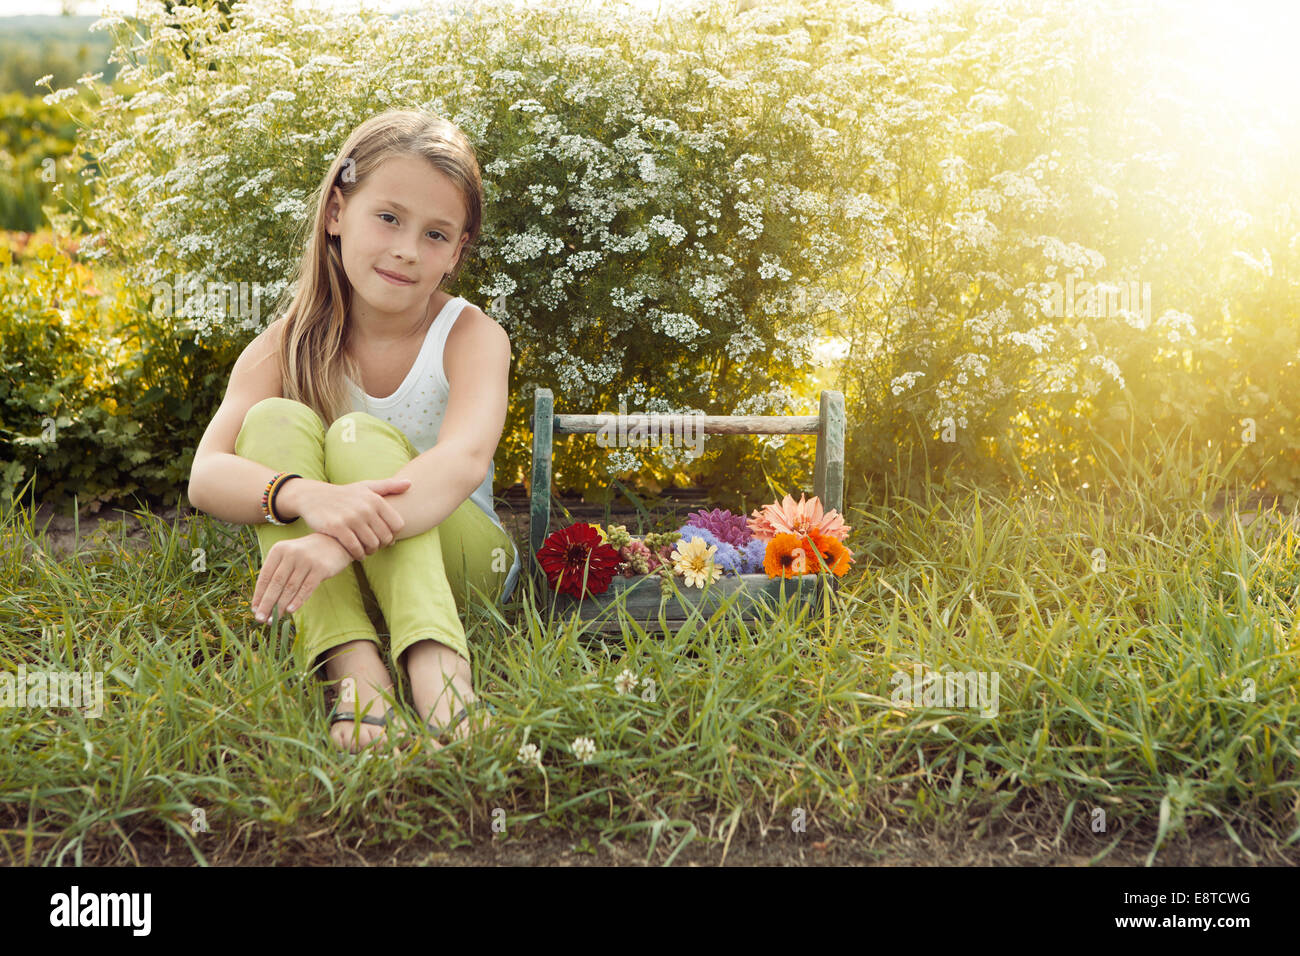 Caucasian girl sitting with basket of flowers Stock Photo